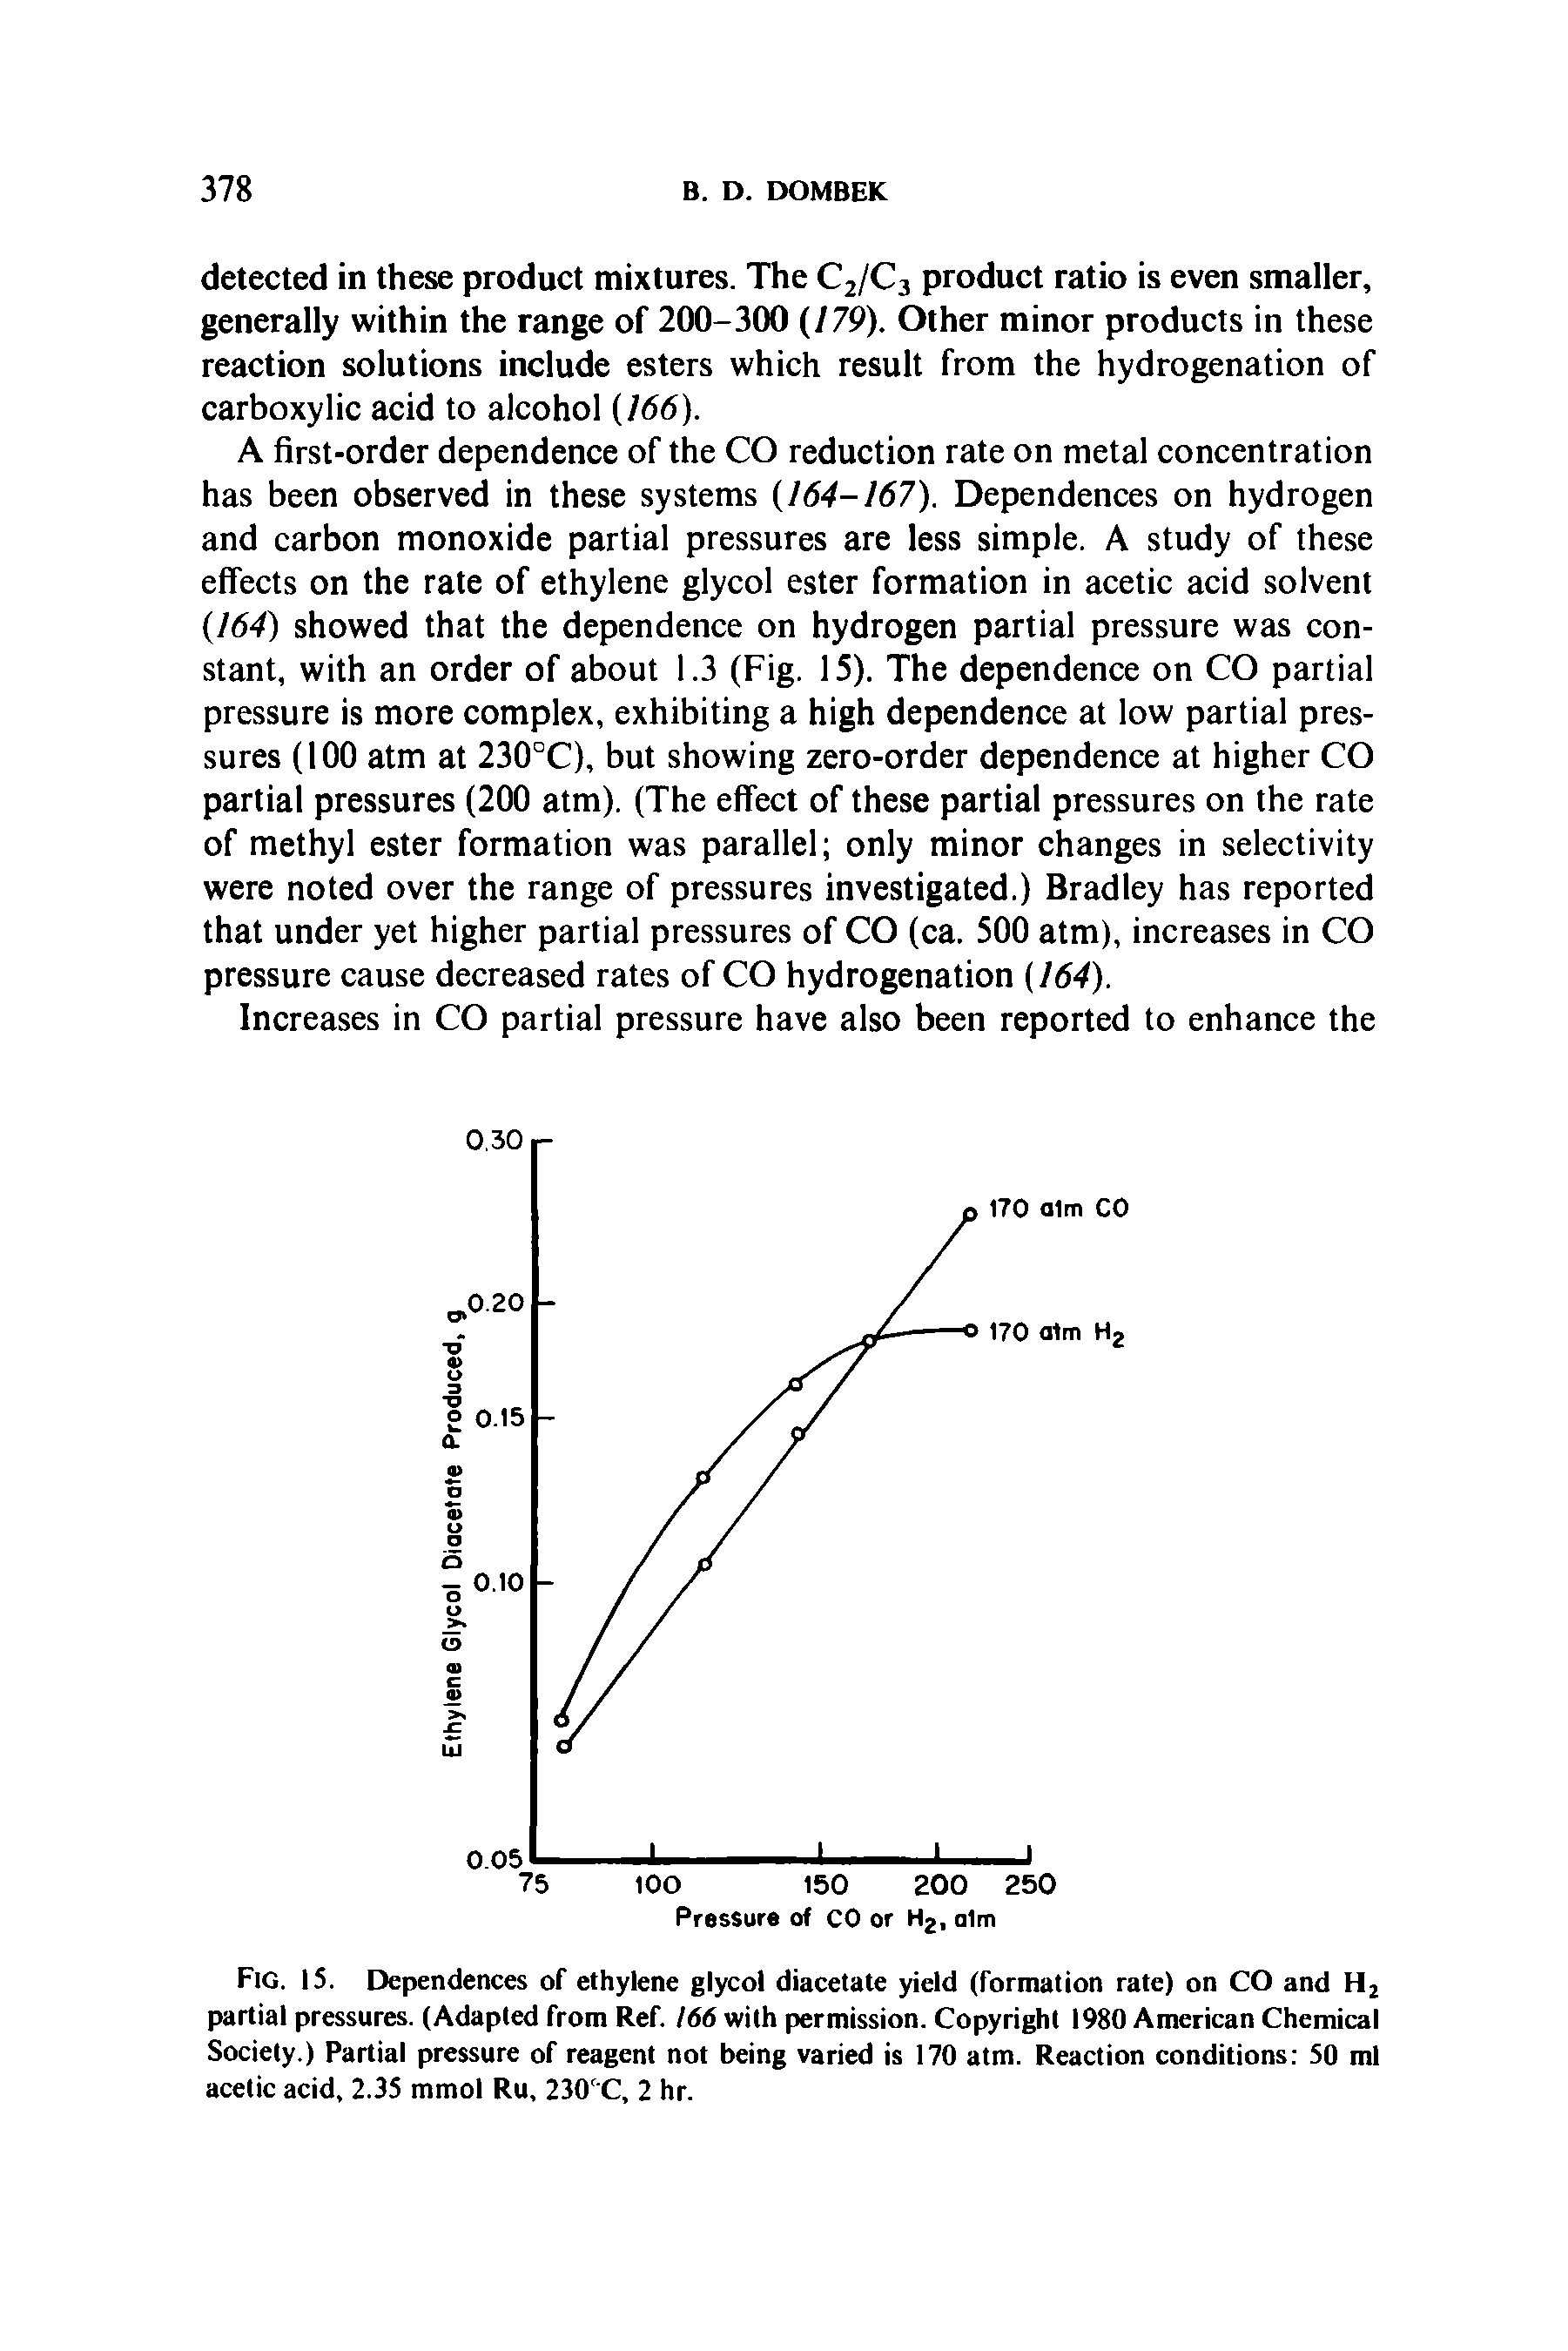 Fig. 15. Dependences of ethylene glycol diacetate yield (formation rate) on CO and H2 partial pressures. (Adapted from Ref. 166 with permission. Copyright 1980 American Chemical Society.) Partial pressure of reagent not being varied is 170 atm. Reaction conditions 50 ml acetic acid, 2.35 mmol Ru, 230C C, 2 hr.